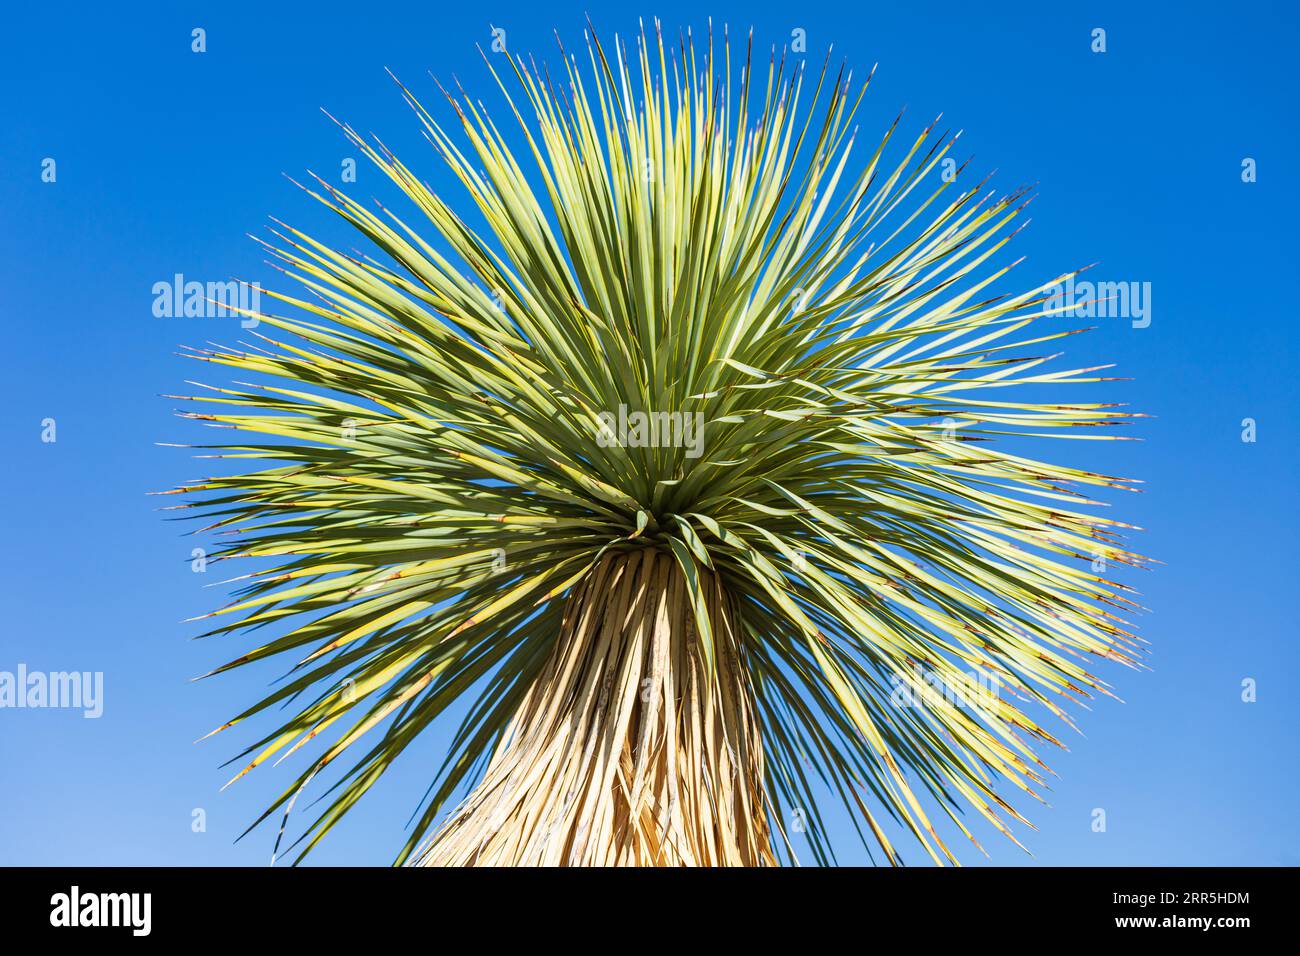 Indian Wells, California, USA. Large yucca plants in the desert. Stock Photo